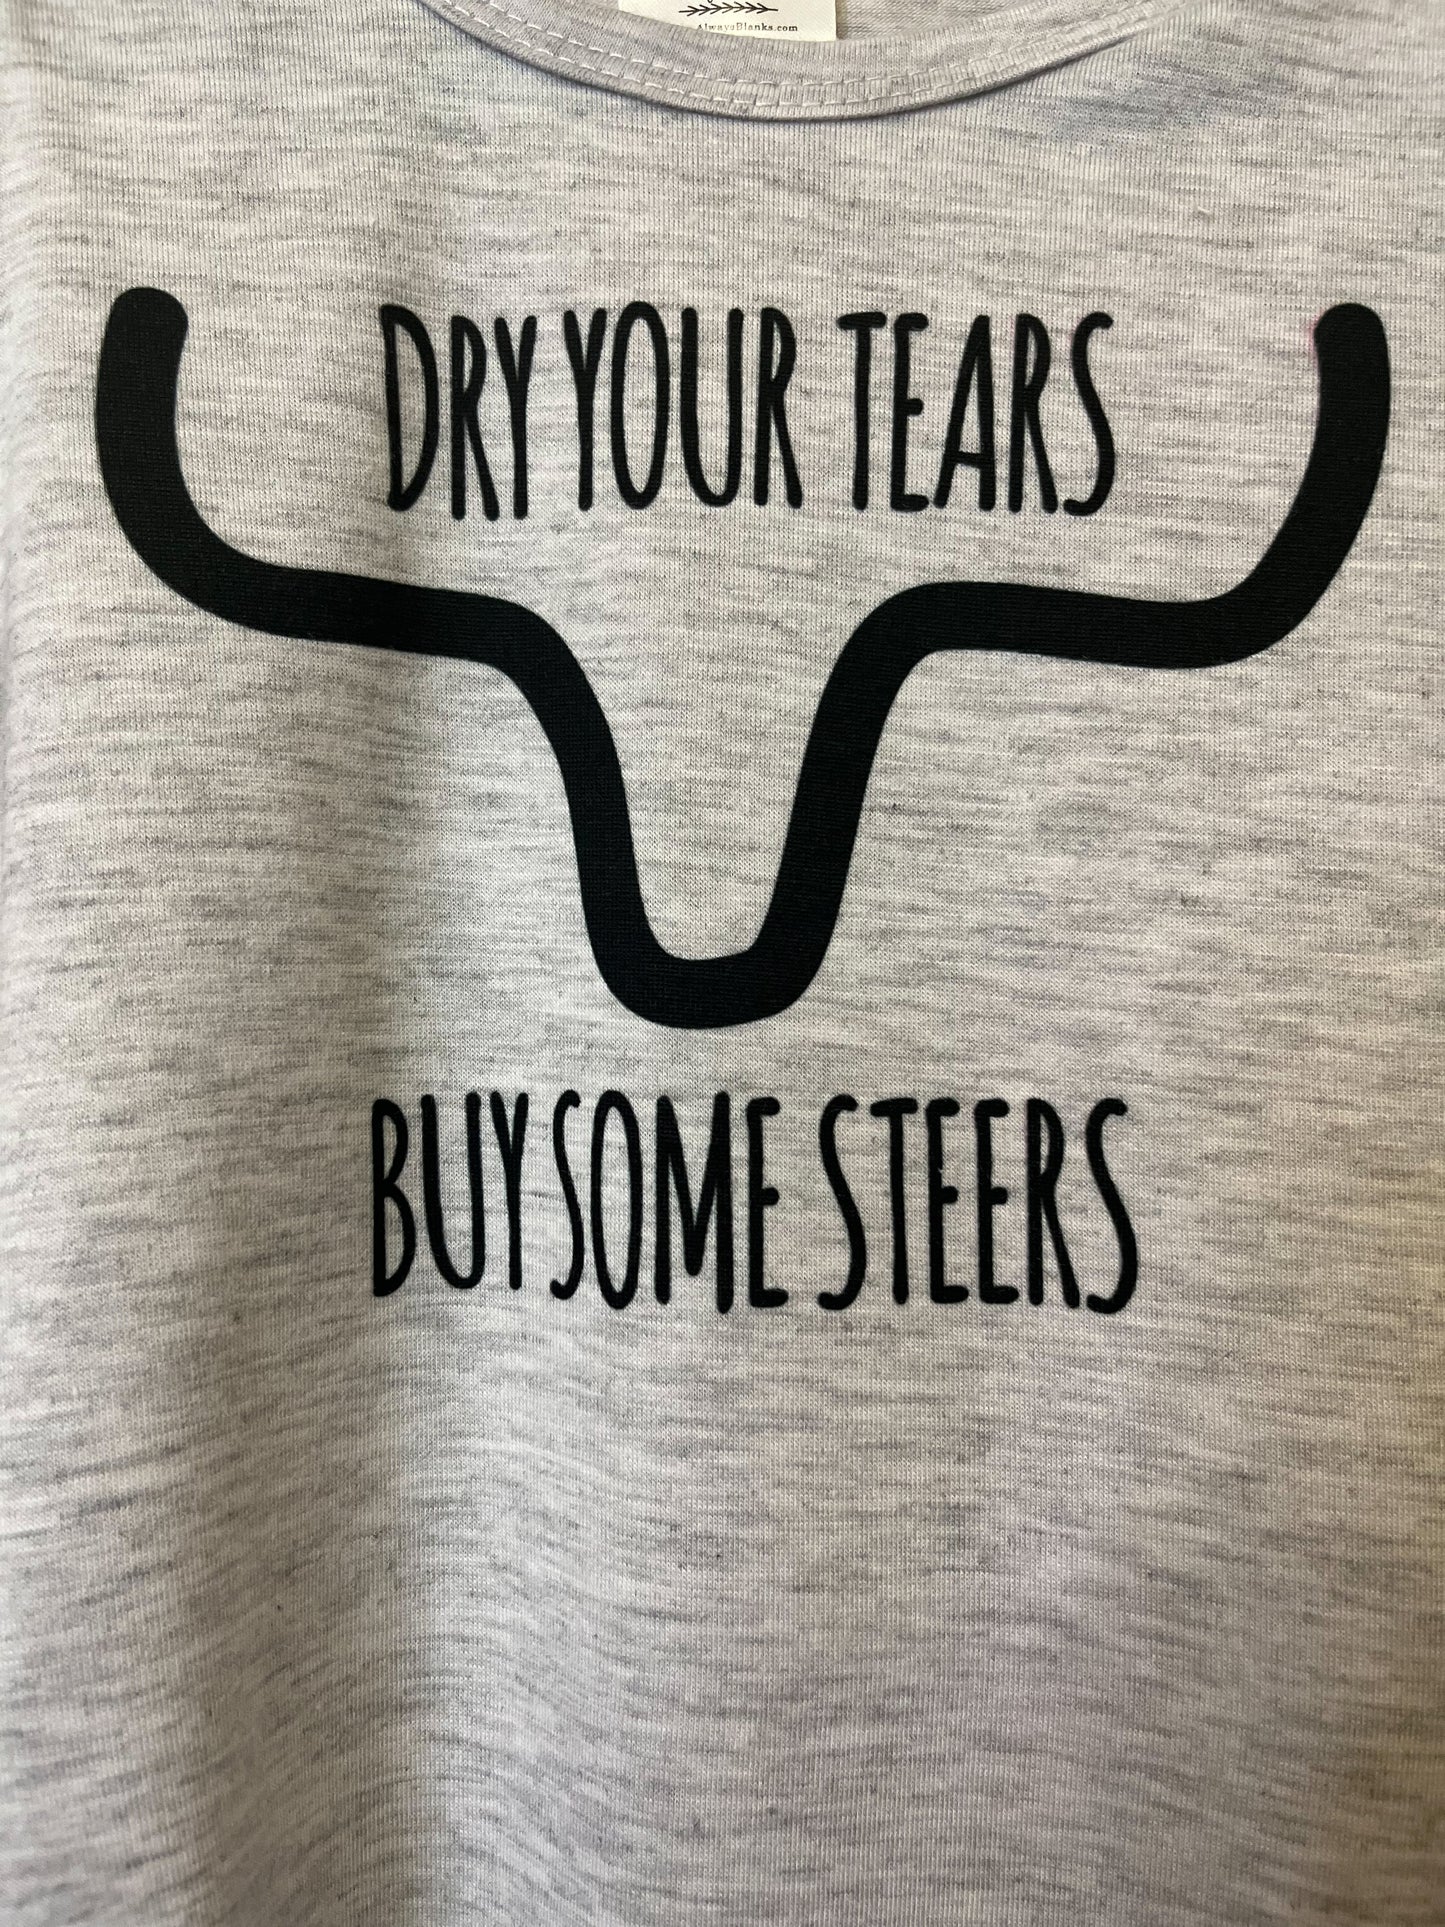 the Dry Your Tears |Buy| Some Steers tee